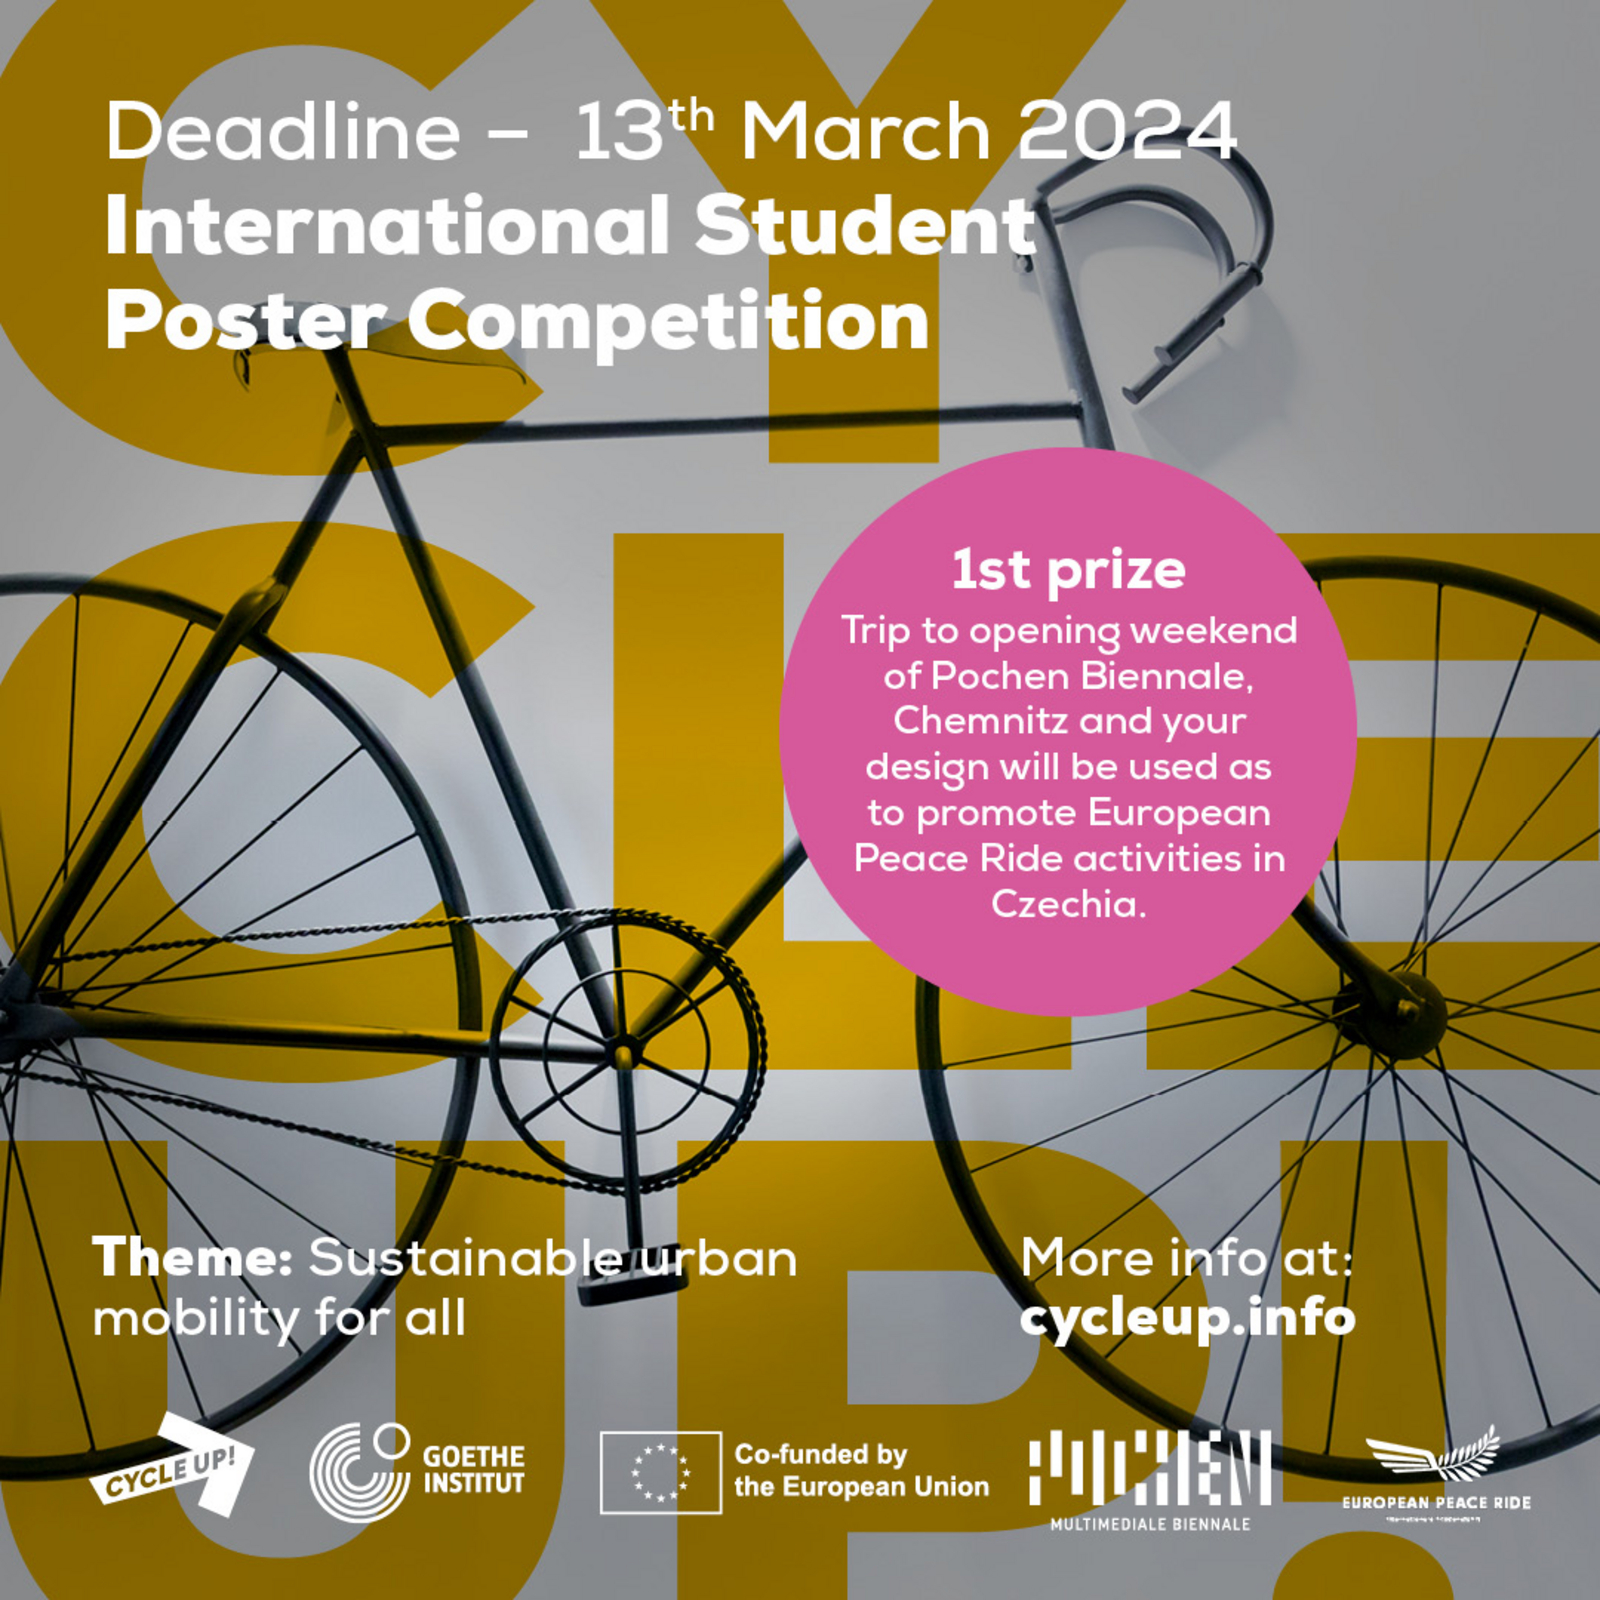 Ad Cycle Up! Poster Competition